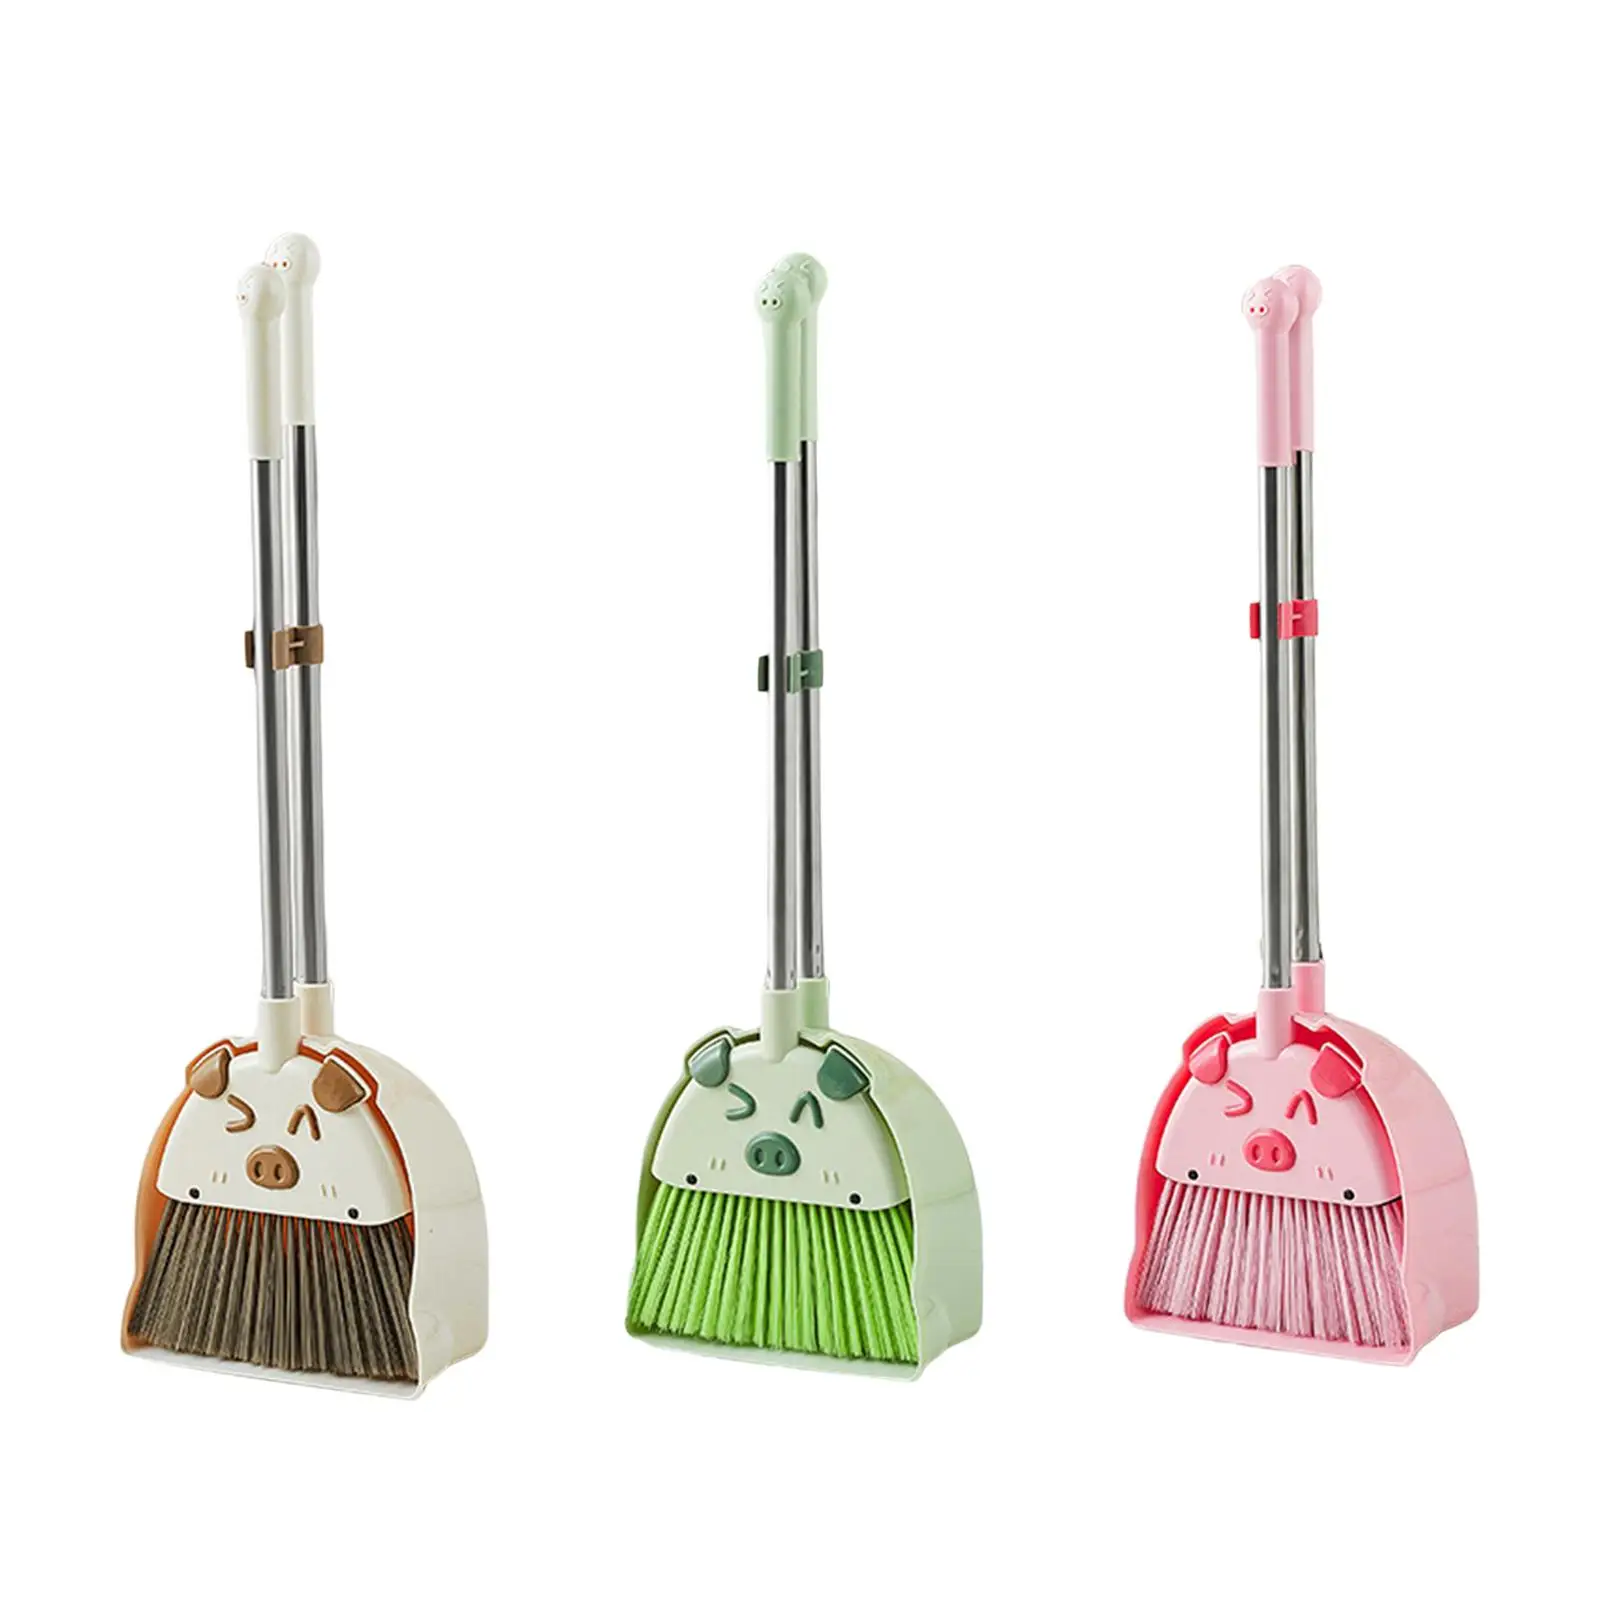 Kids Broom Dustpan Set Educational Toy House Cleaning Gifts Funny Kids Cleaning Set for Age 3-6 Girls Boys Birthday Gifts